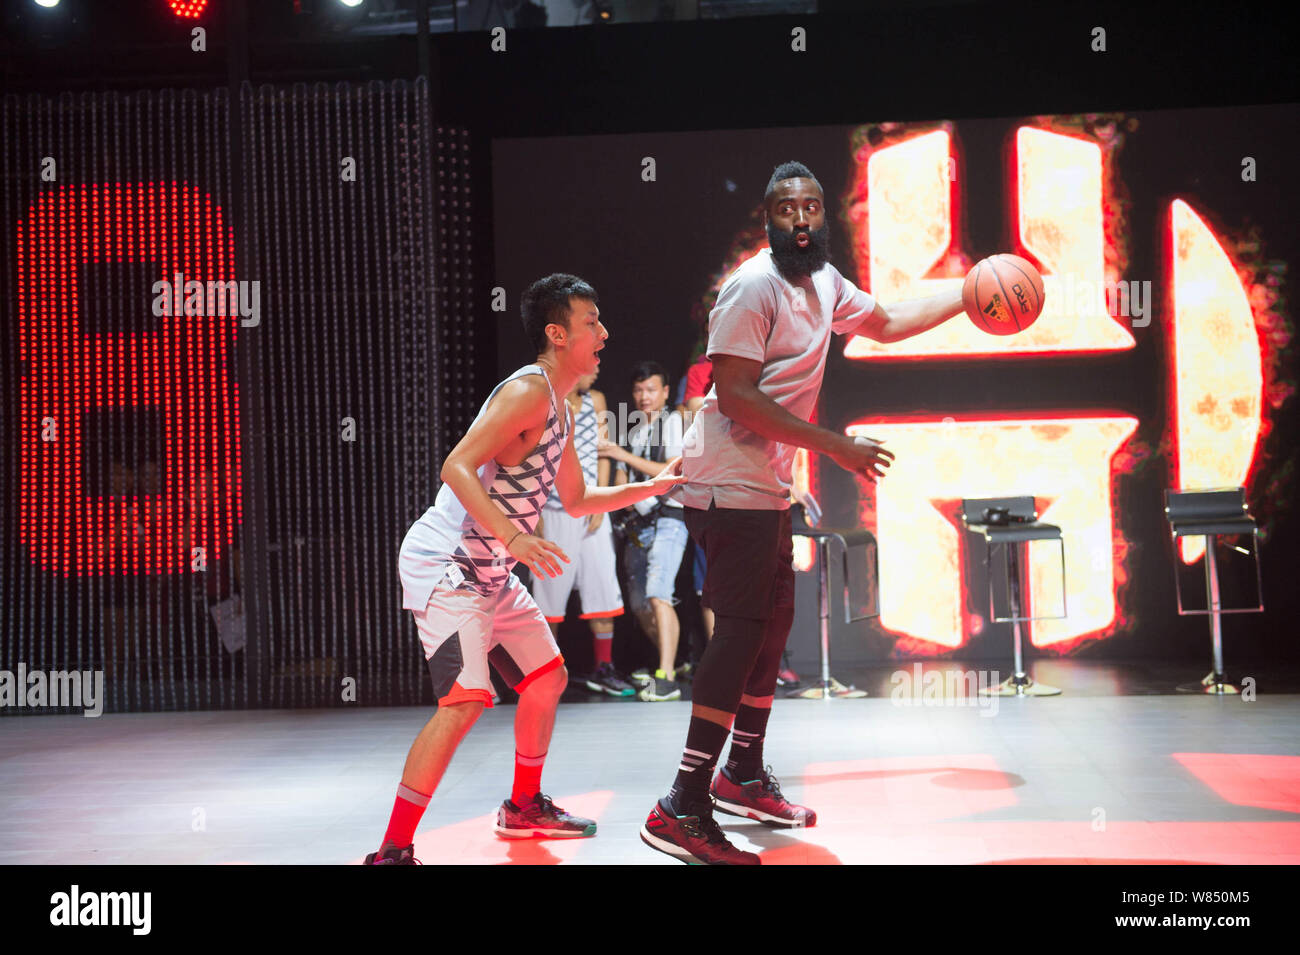 NBA star Harden, right, plays basketball during a promotional for Adidas in Beijing, China, September 2016 Stock Photo - Alamy